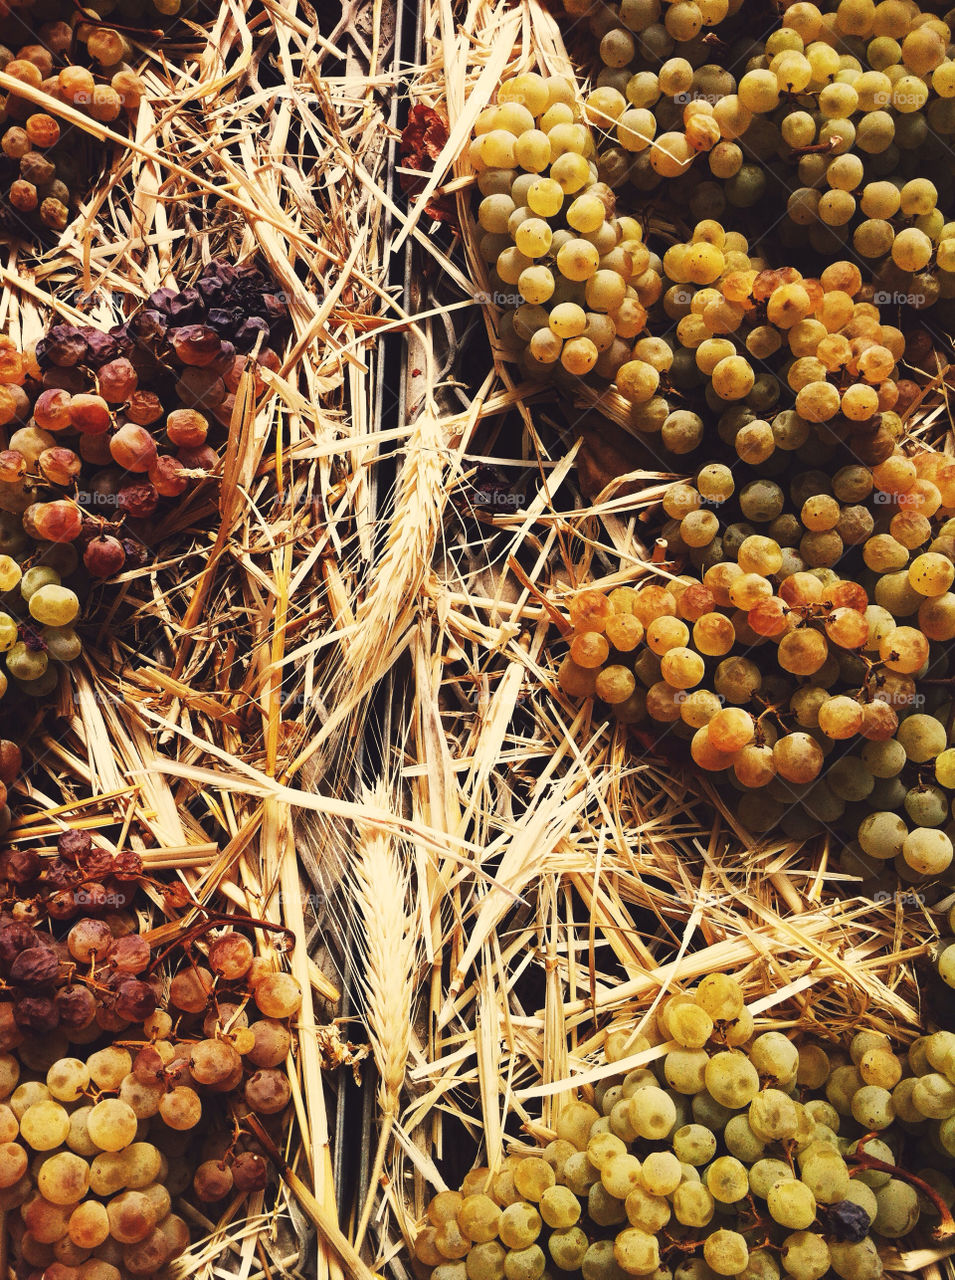 Wine grapes drying on hay.